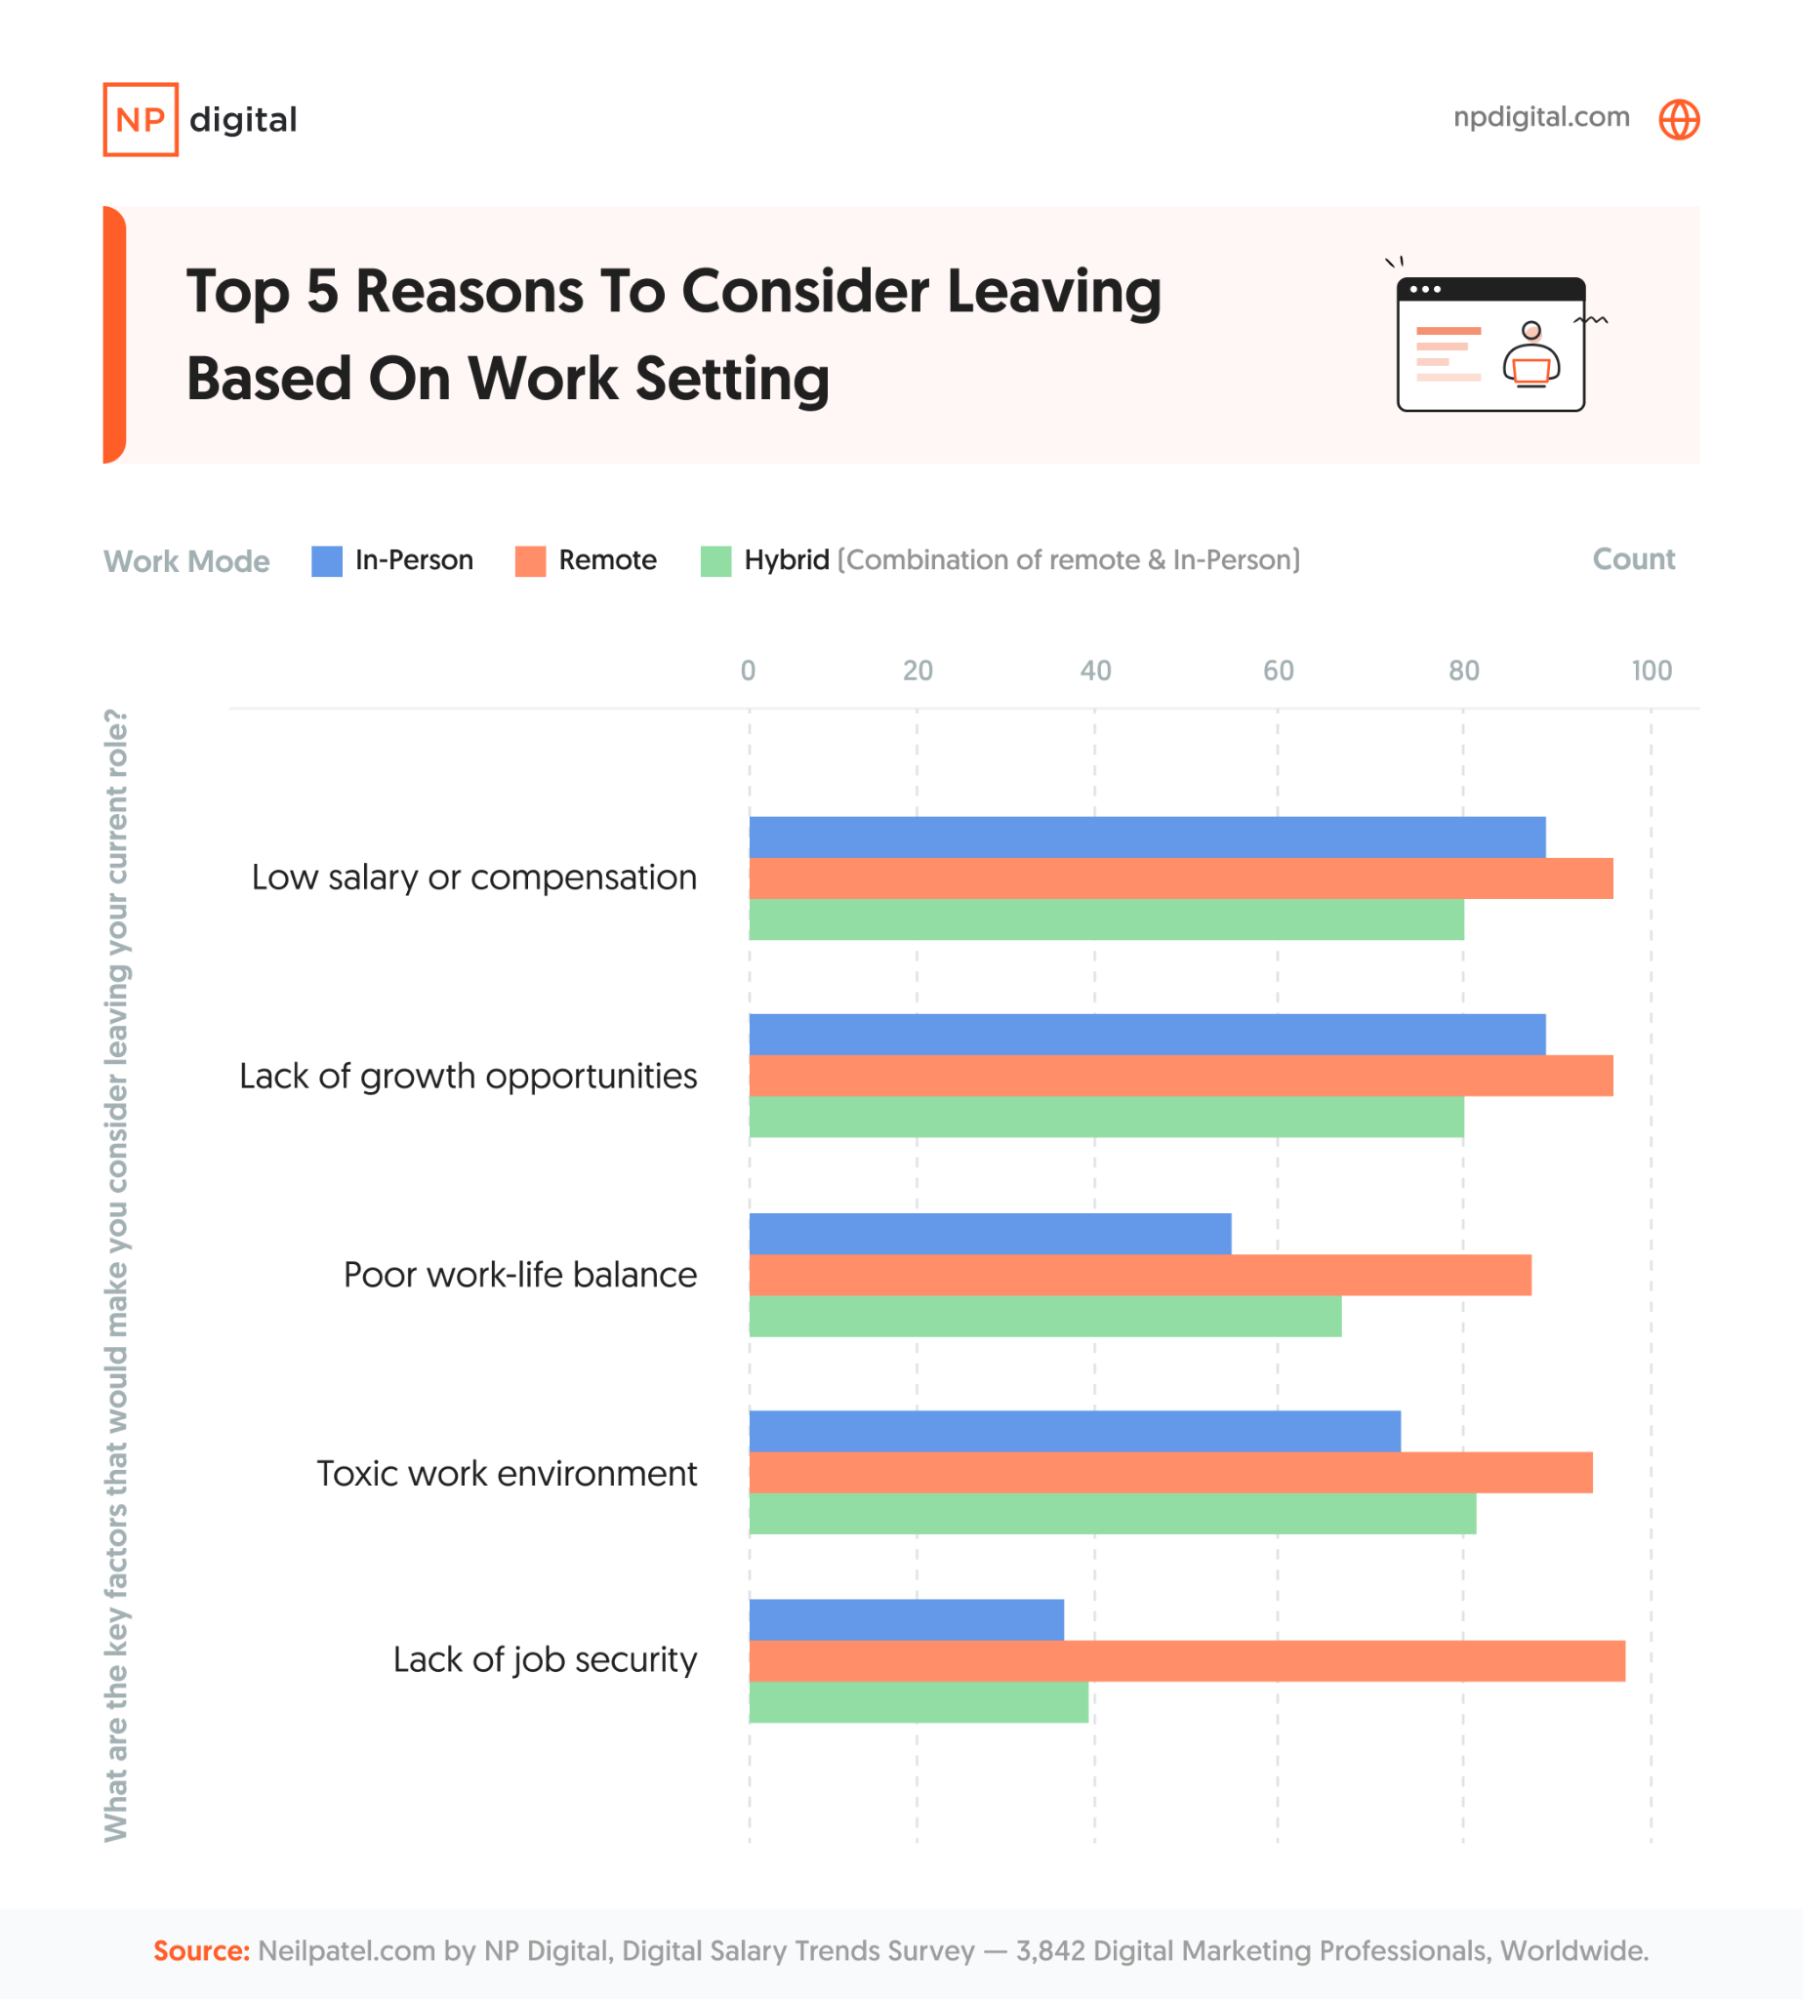 Top five reasons for considering leaving based on work setting